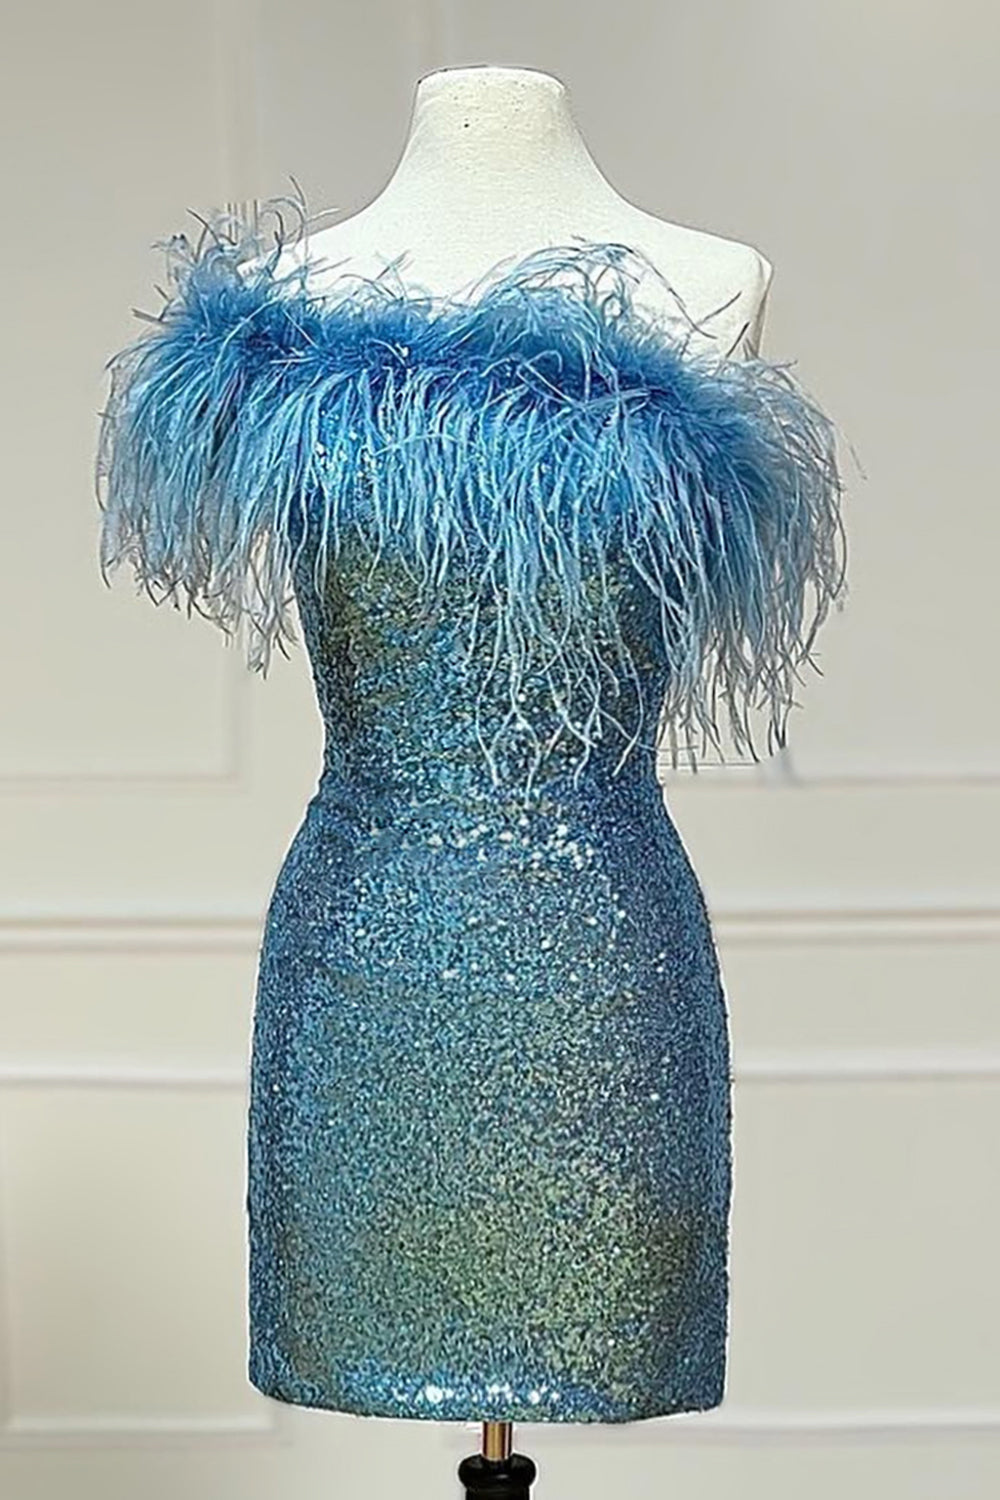 Florence | Light Blue Sparkly Tight Sequins Homecoming Dress with Feathers